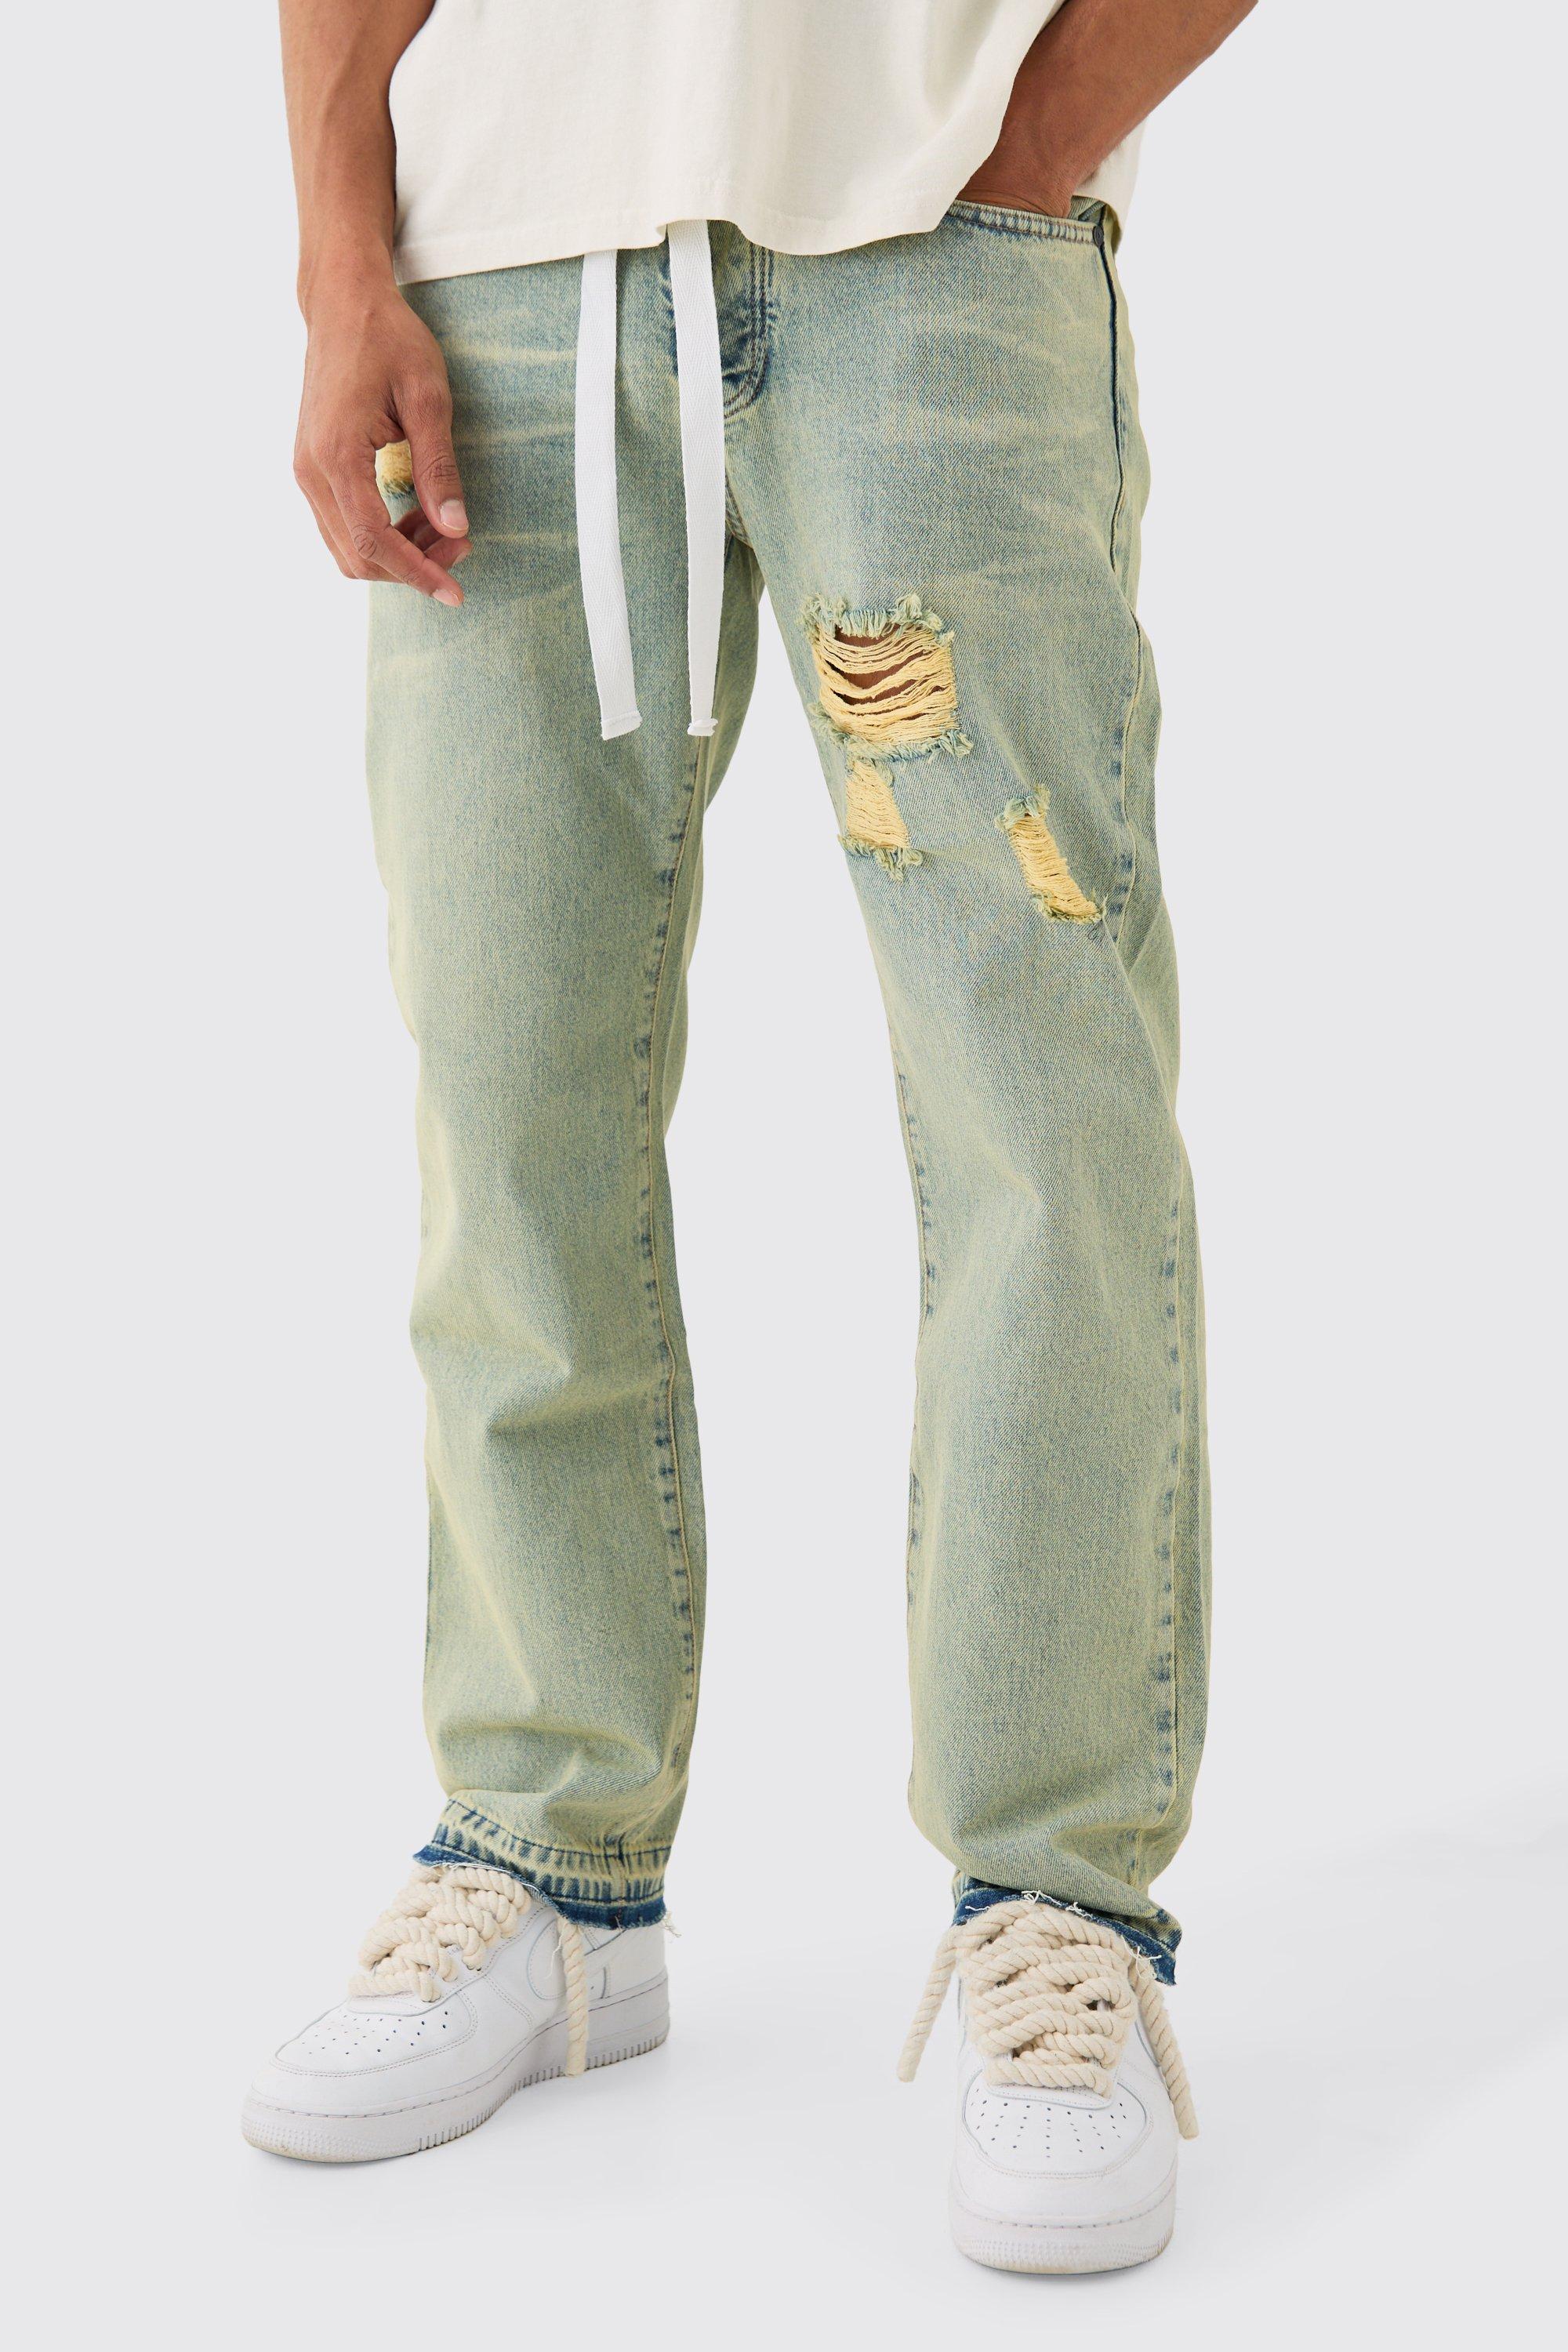 Image of Relaxed Rigid Ripped Let Down Hem Jeans With Extended Drawcords In Green Wash, Verde